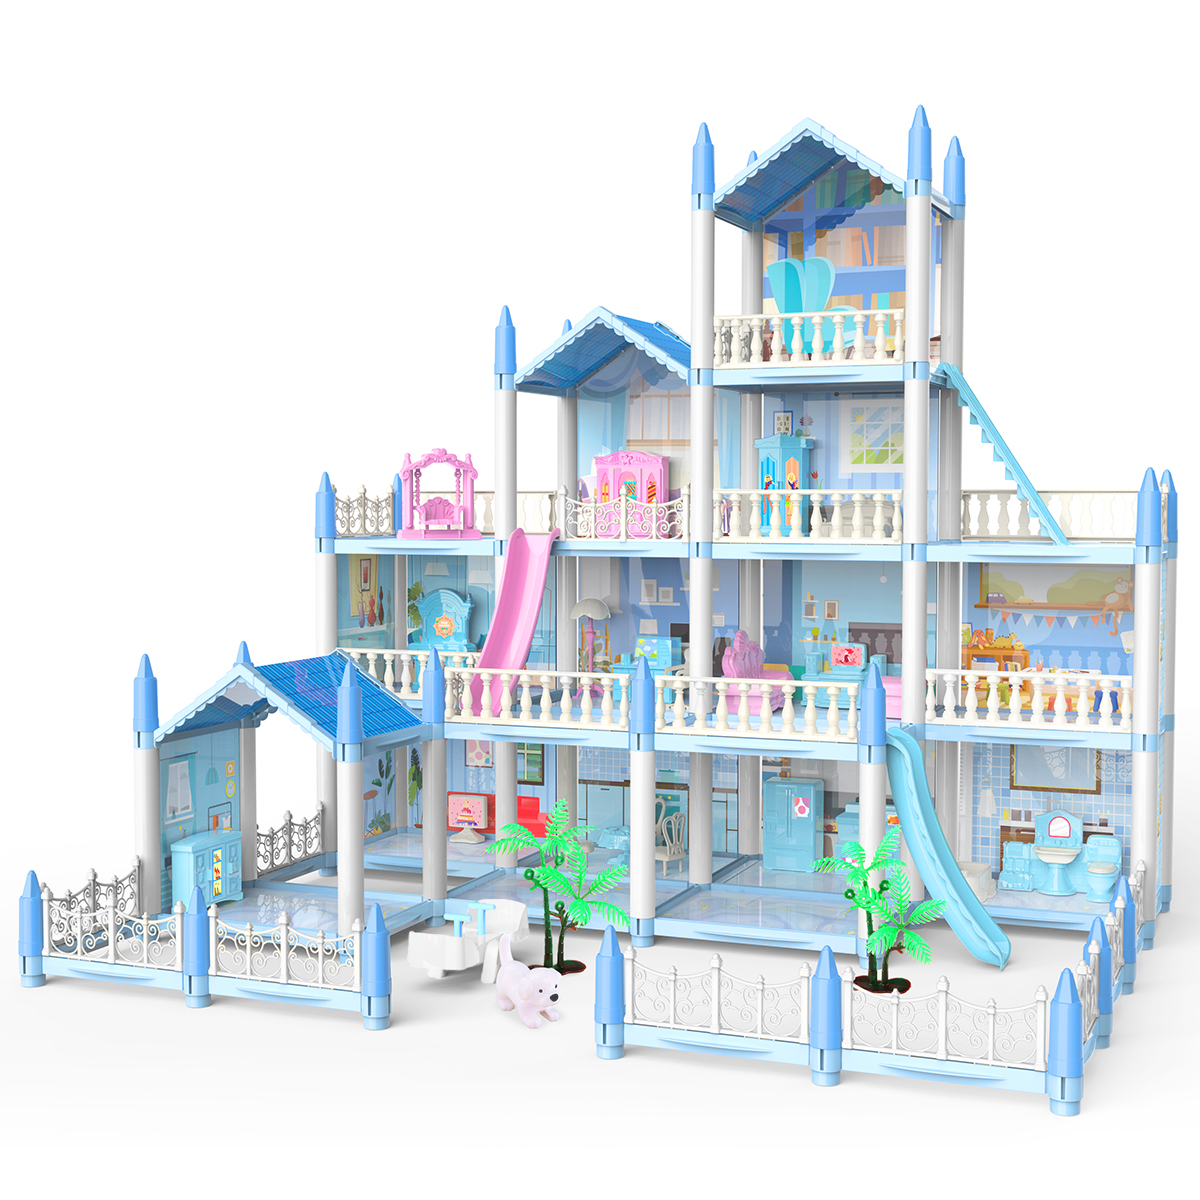 Doll House, Dream House Playset with 100+ Furniture & Accessories, 4 Stories 14 Rooms Building Toys with Movable Slides, Stairs, Pets, Cottage, DIY Creative Gift for 3 4 5 6+ Year Old Girls Toddlers - image 1 of 7